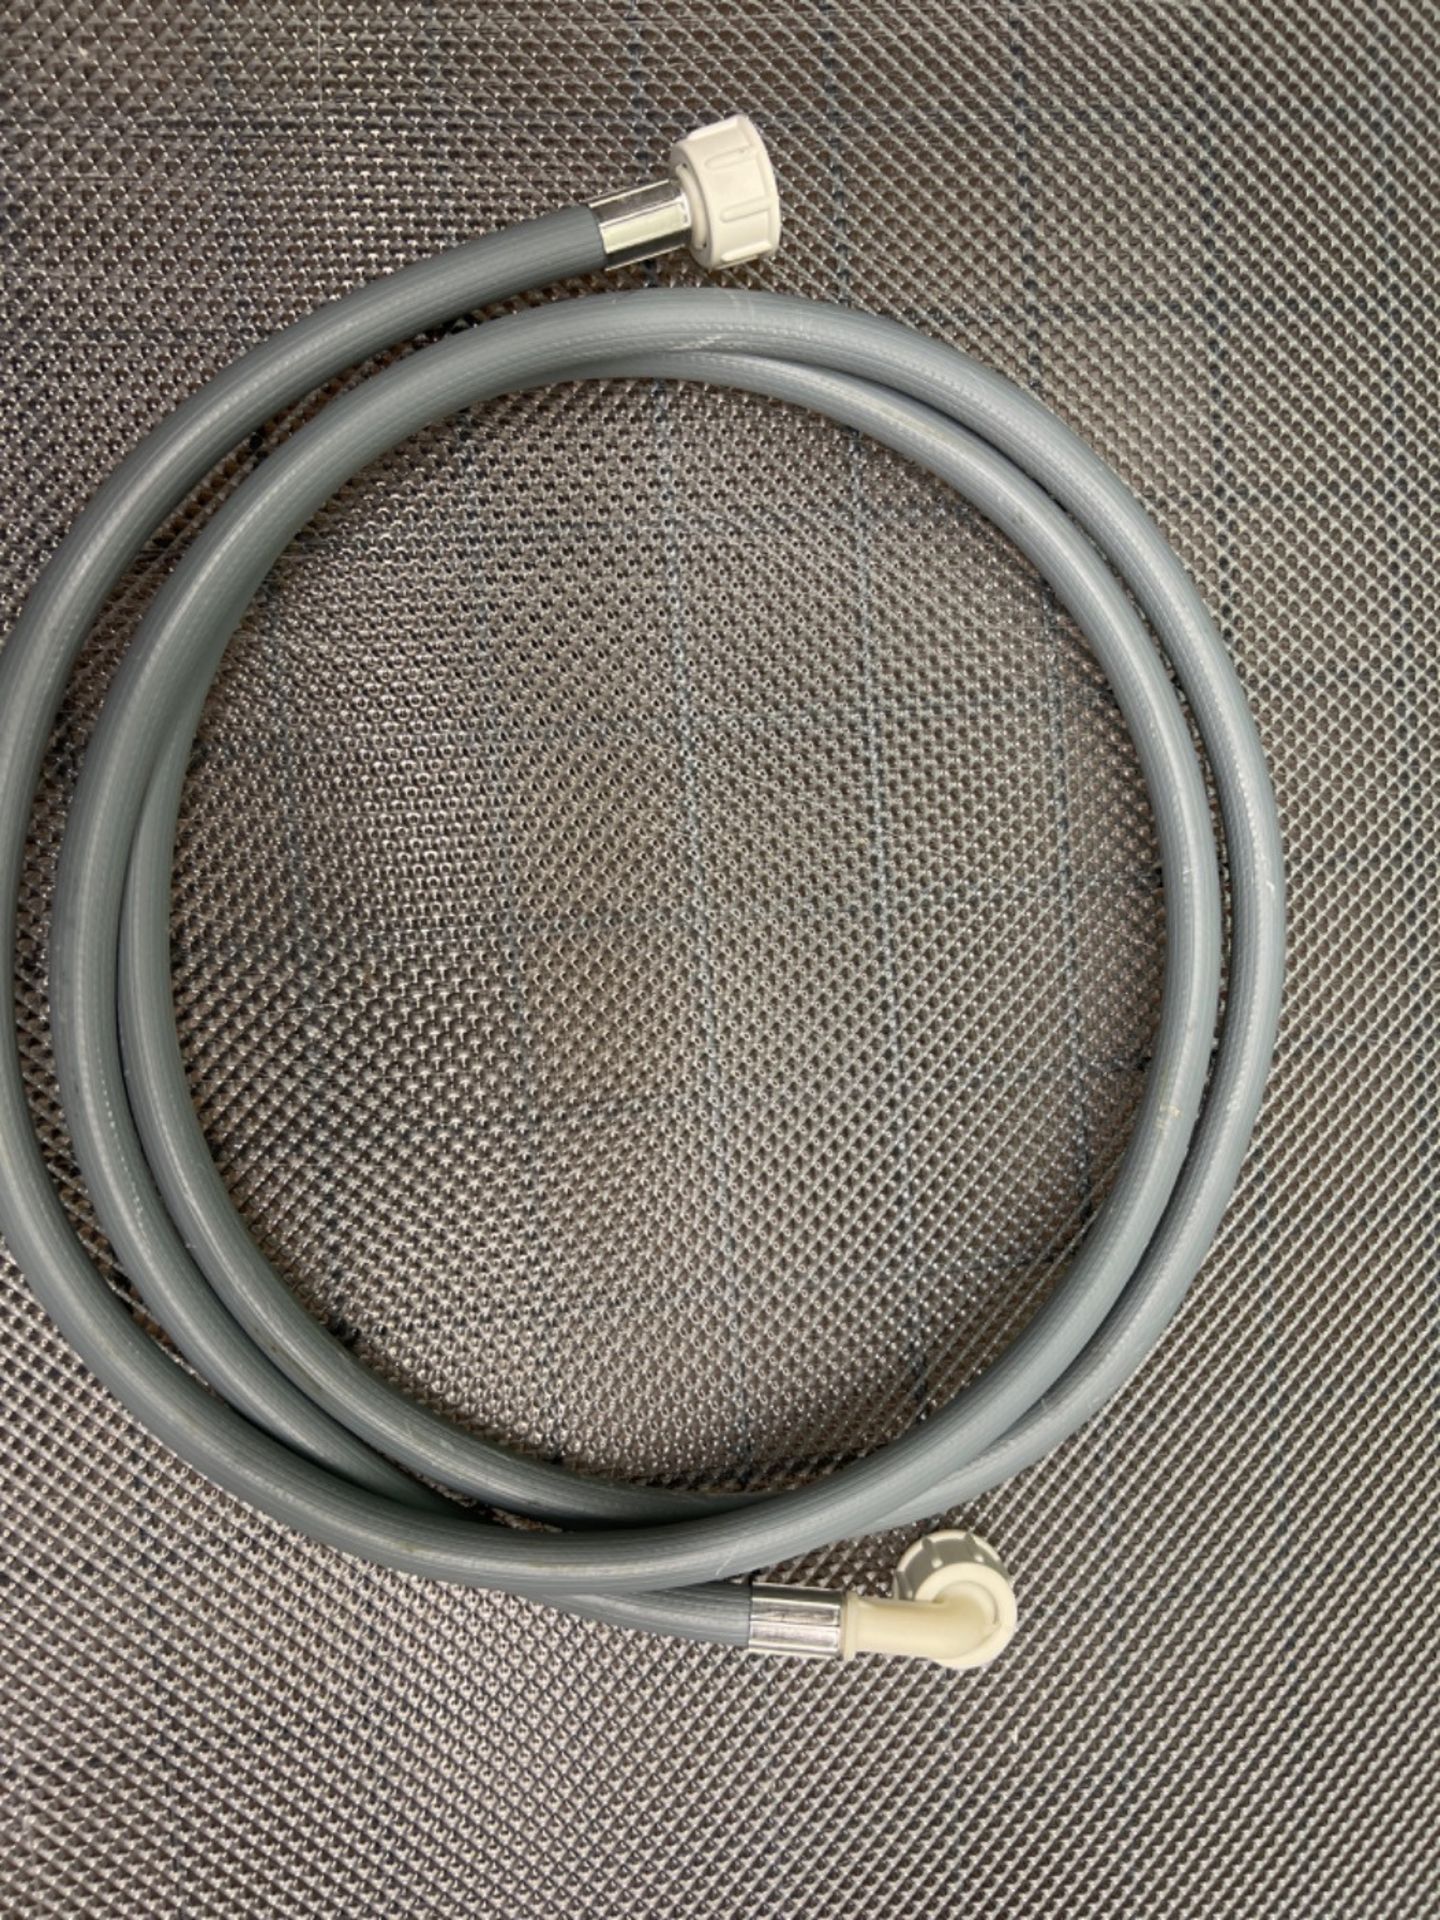 Care + Protect 35601828 Universal Cold Water Inlet Hose-Hose for Connection to Water Mains. Designe - Image 3 of 3